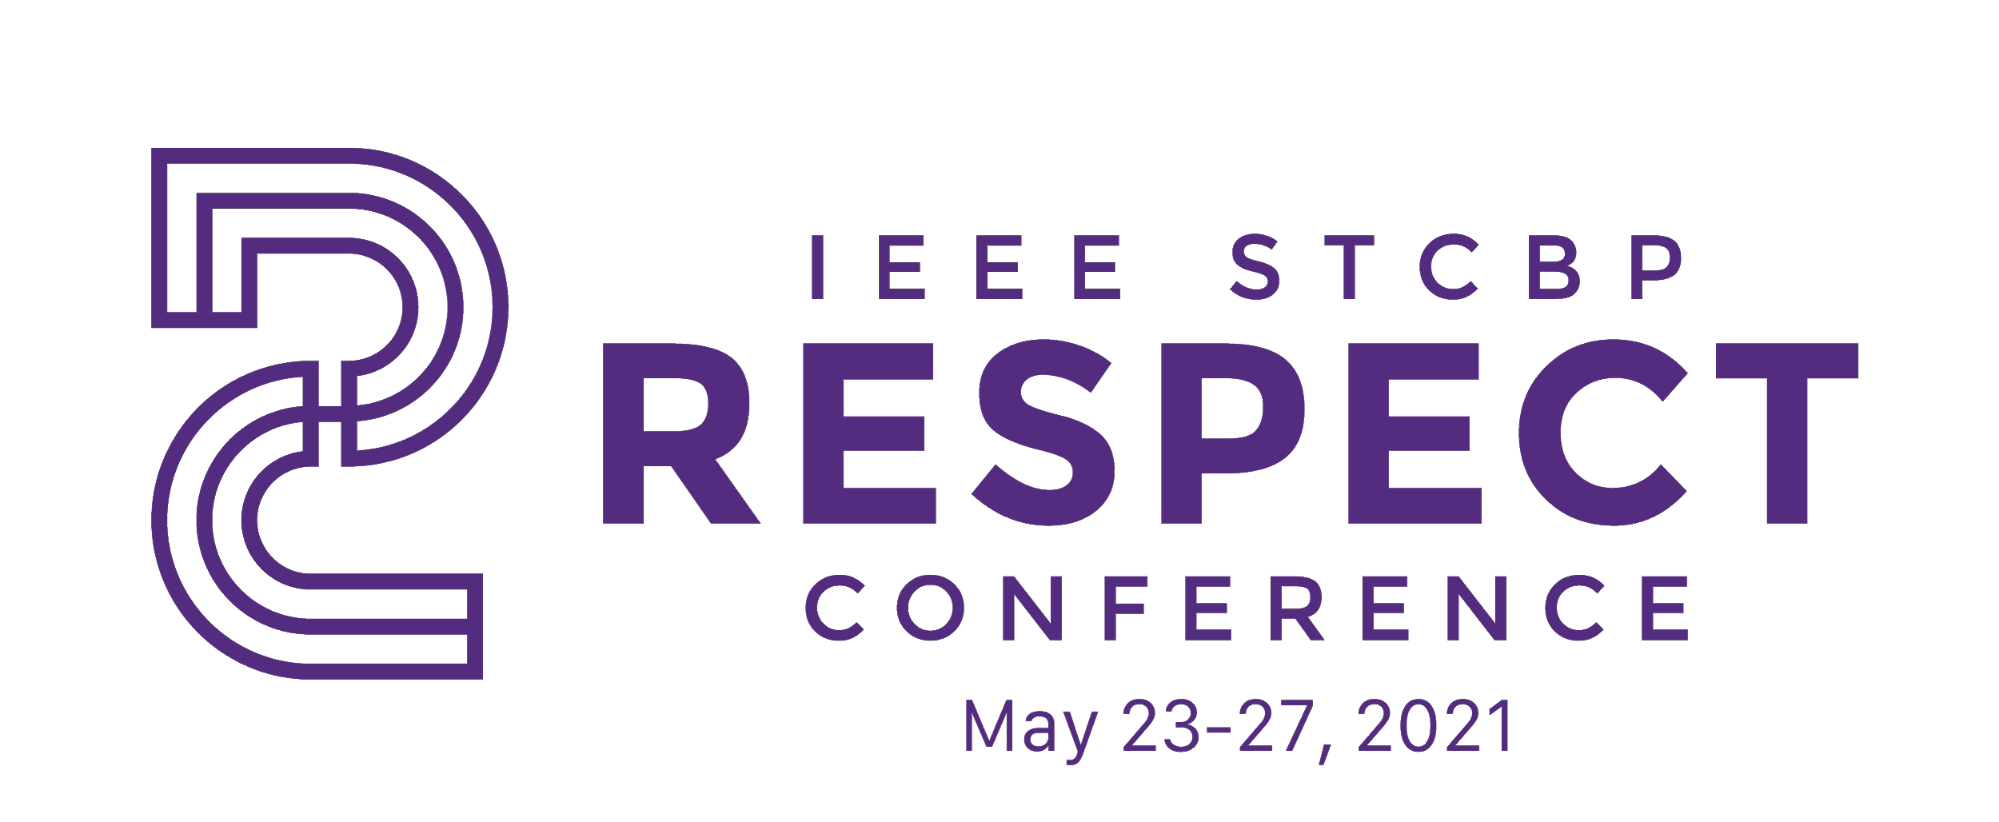 IEEE STCBP Respect Conference, May 23-27, 2021